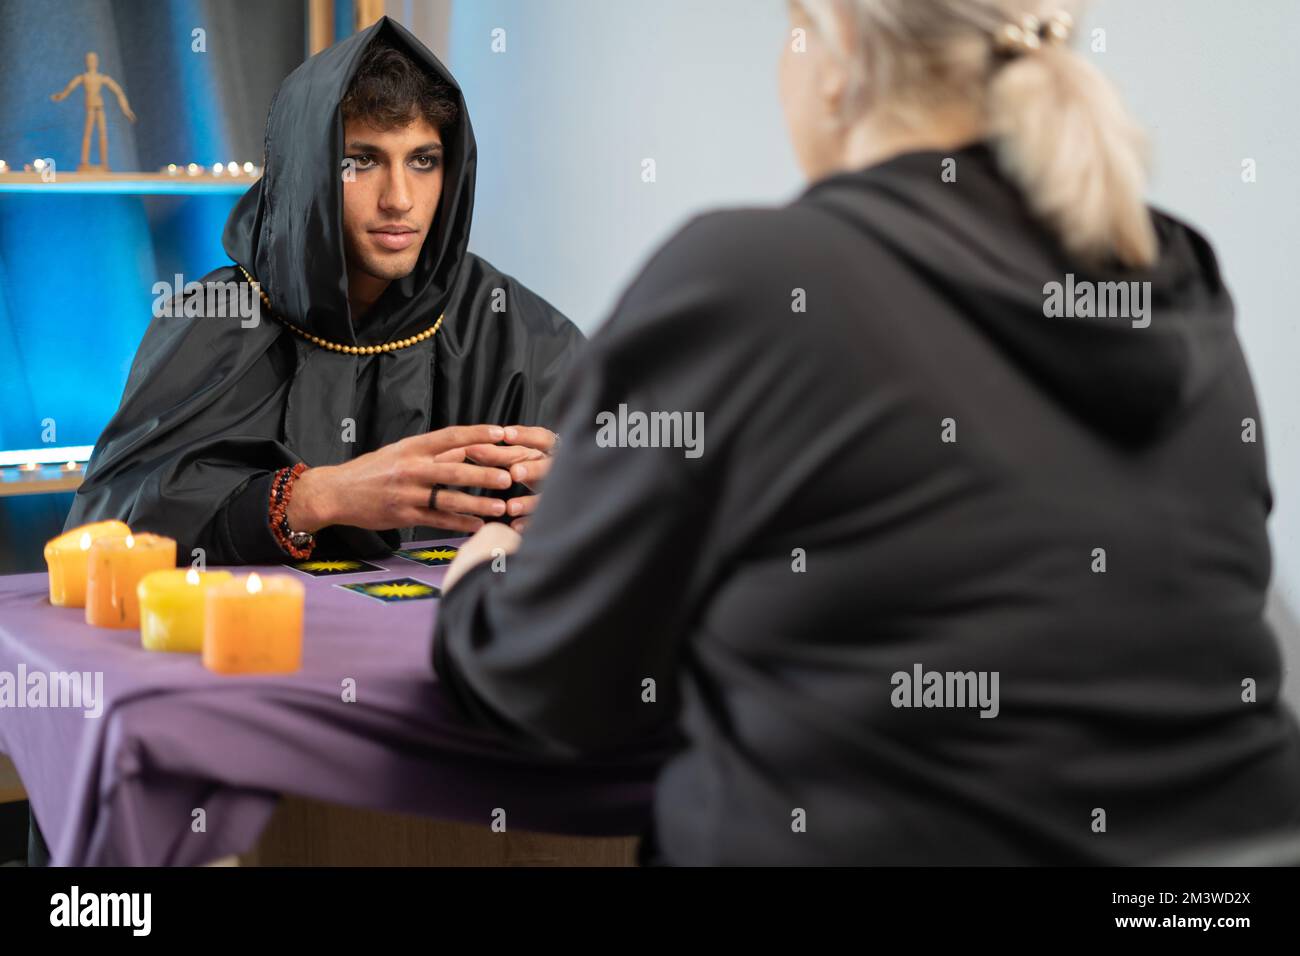 Tarot cards. fortune teller man holding a pack of tarot cards while shuffling them. Mystical session with client Stock Photo